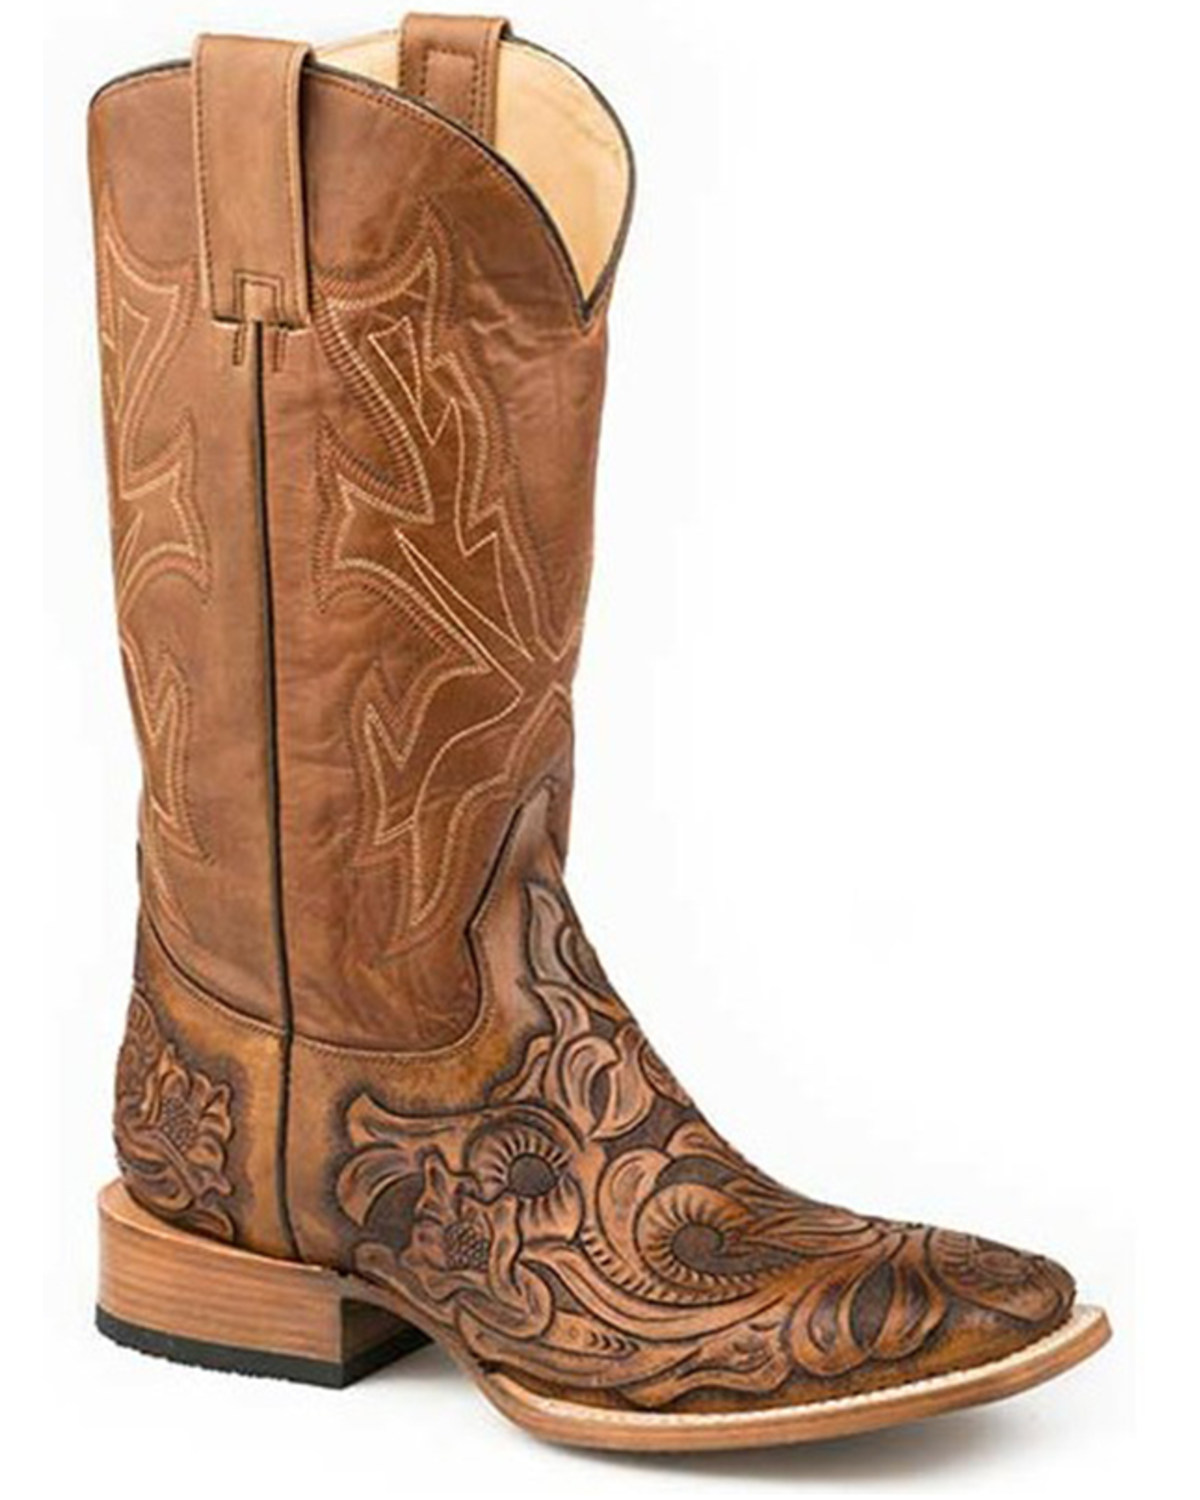 Stetson Men's Handtooled Wicks Western Boots - Broad Square Toe